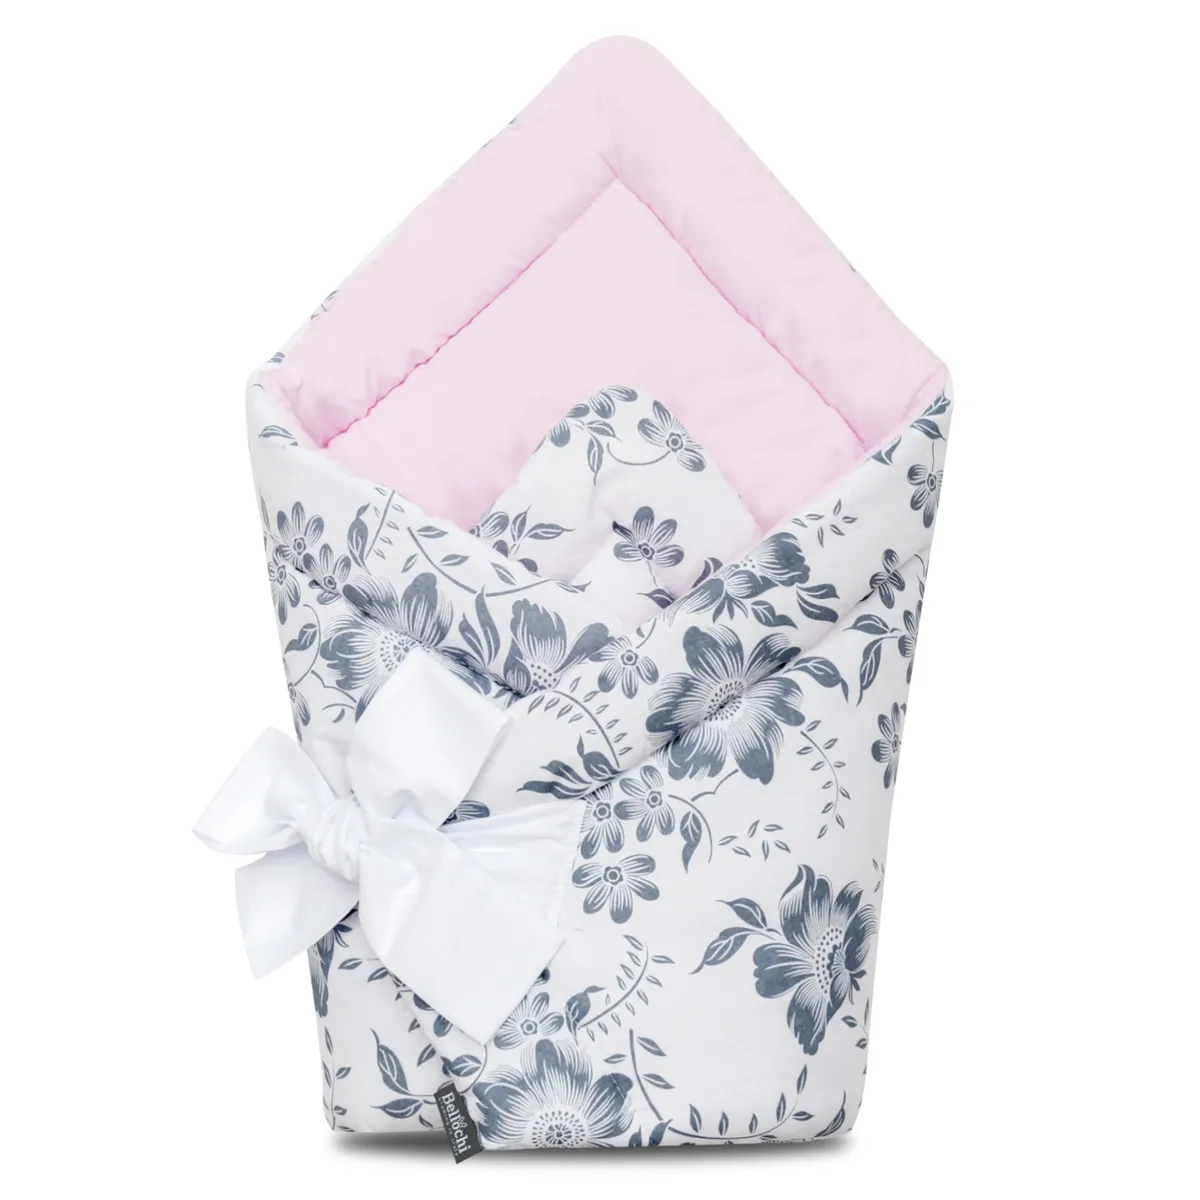 Swaddle blanket 75×75 cm pink berry